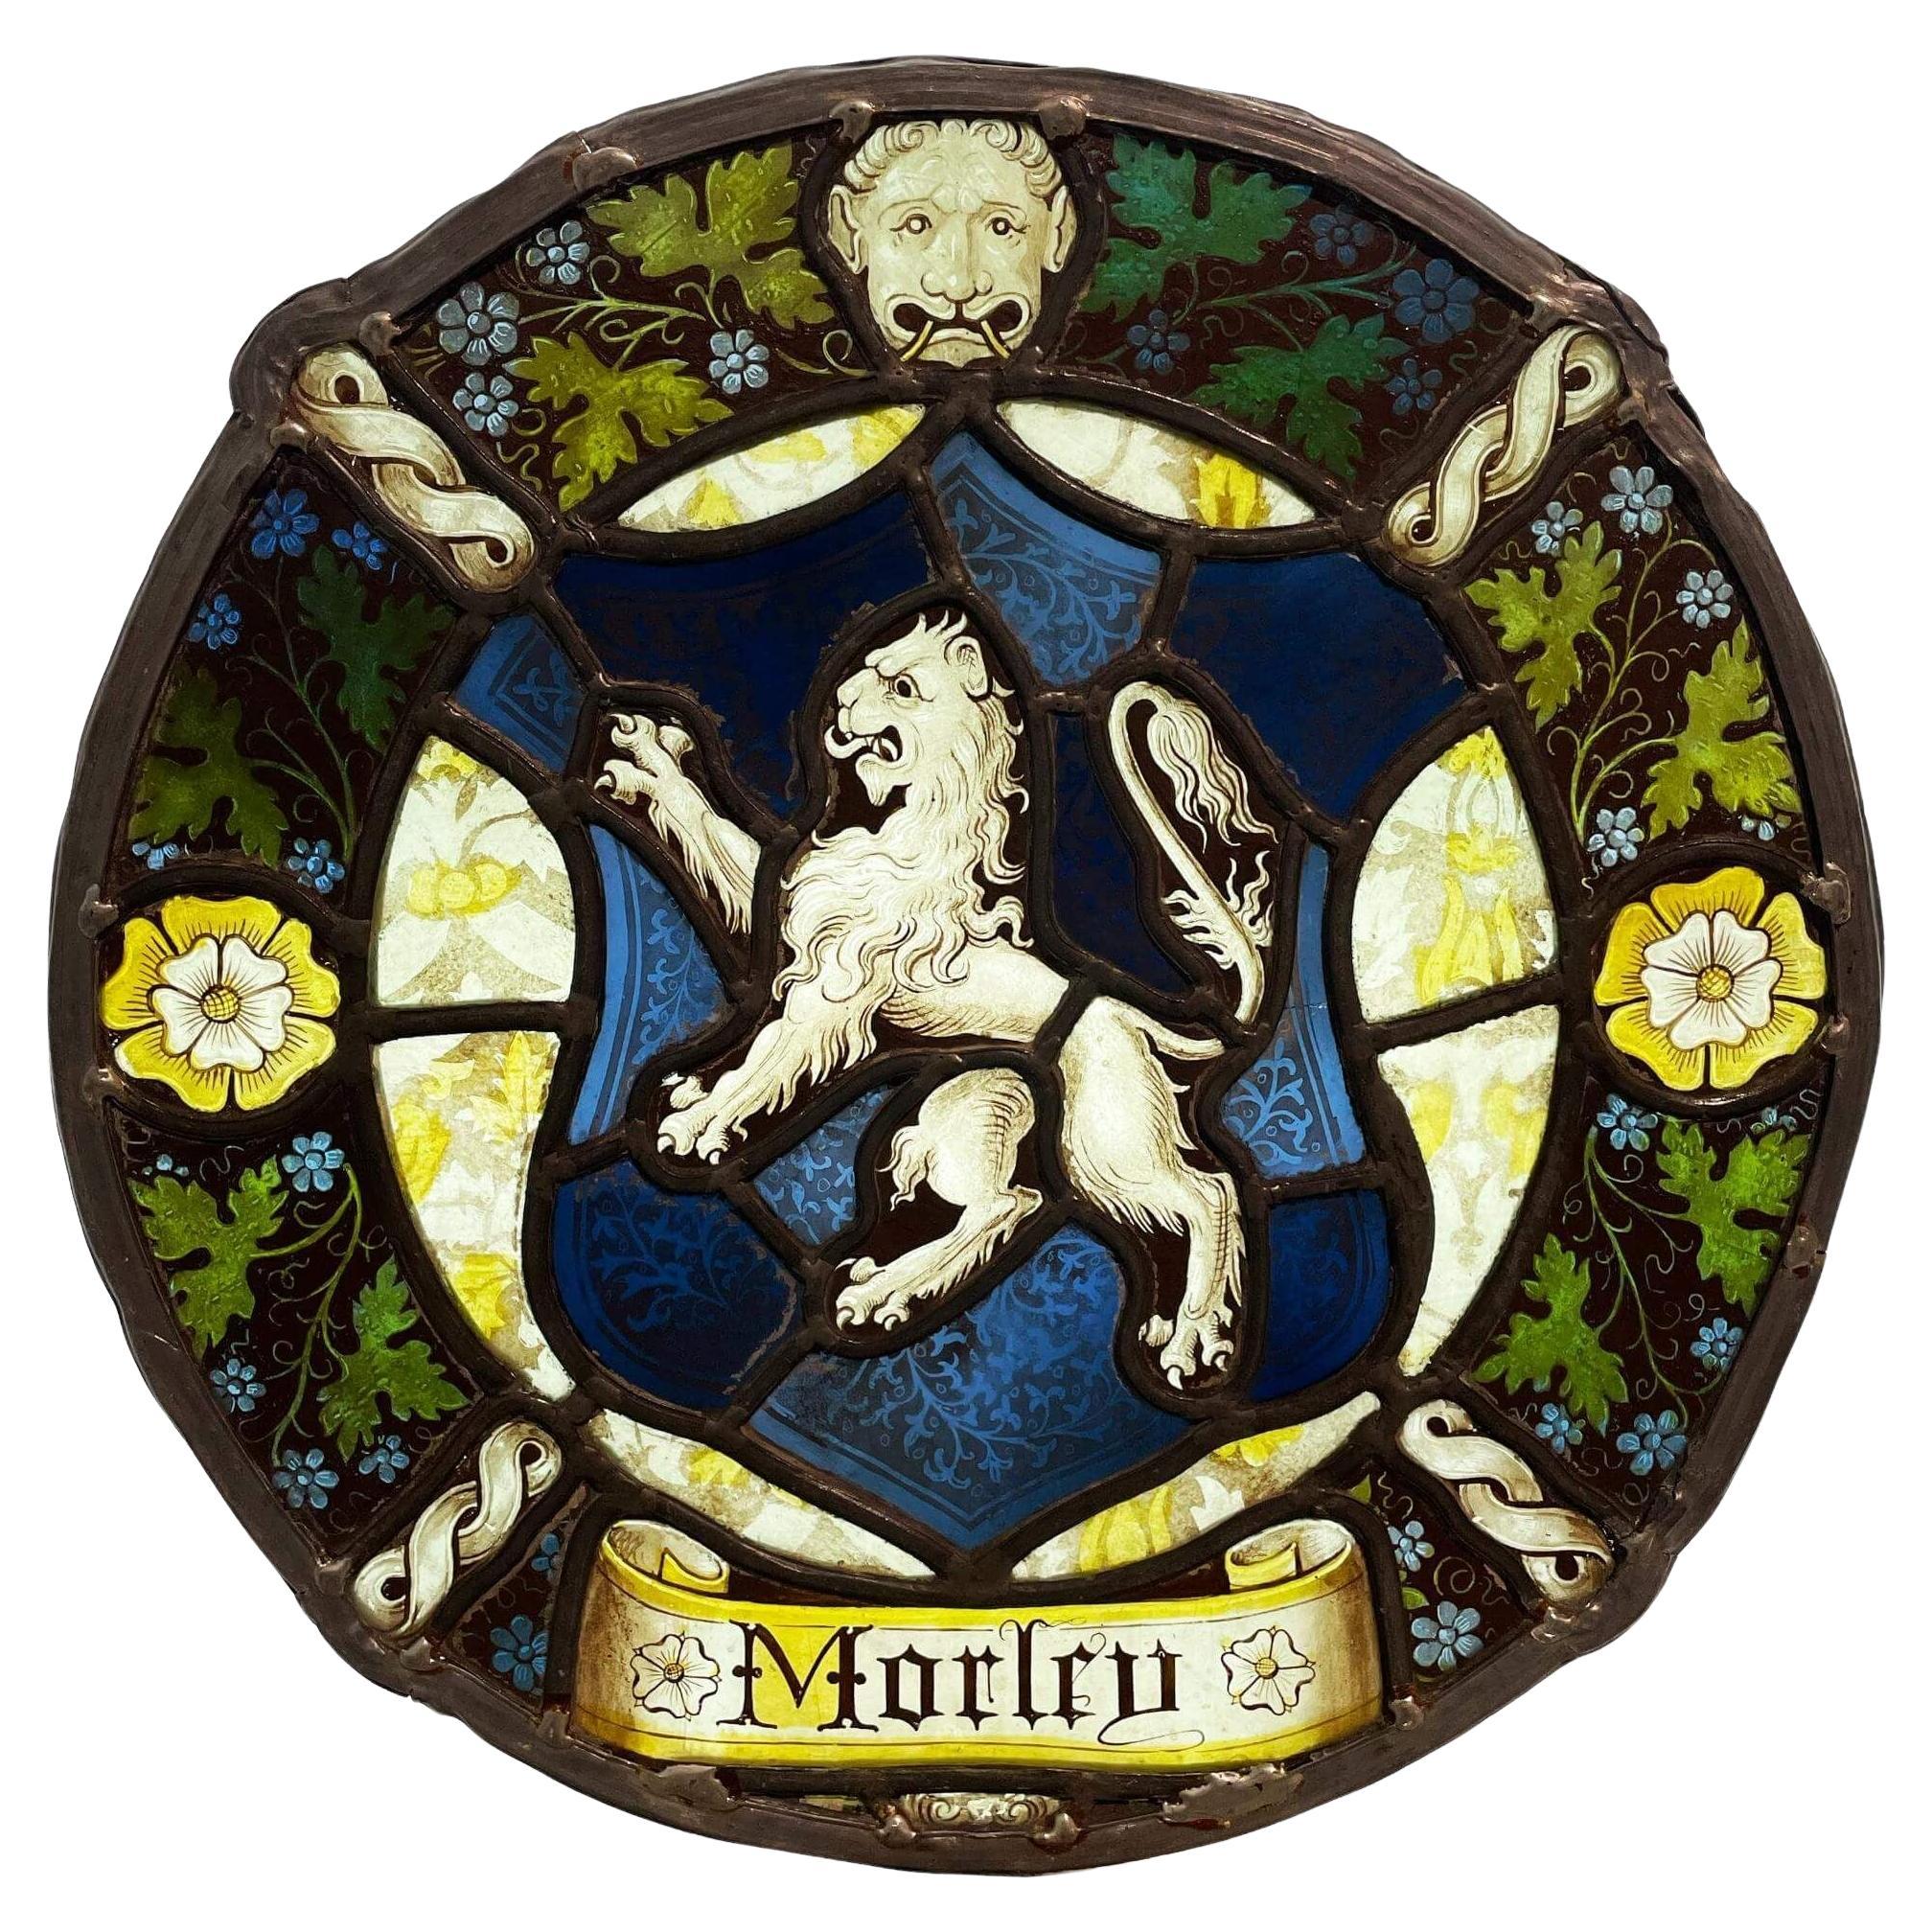 English Stained Glass Roundel of the Morley Family Crest